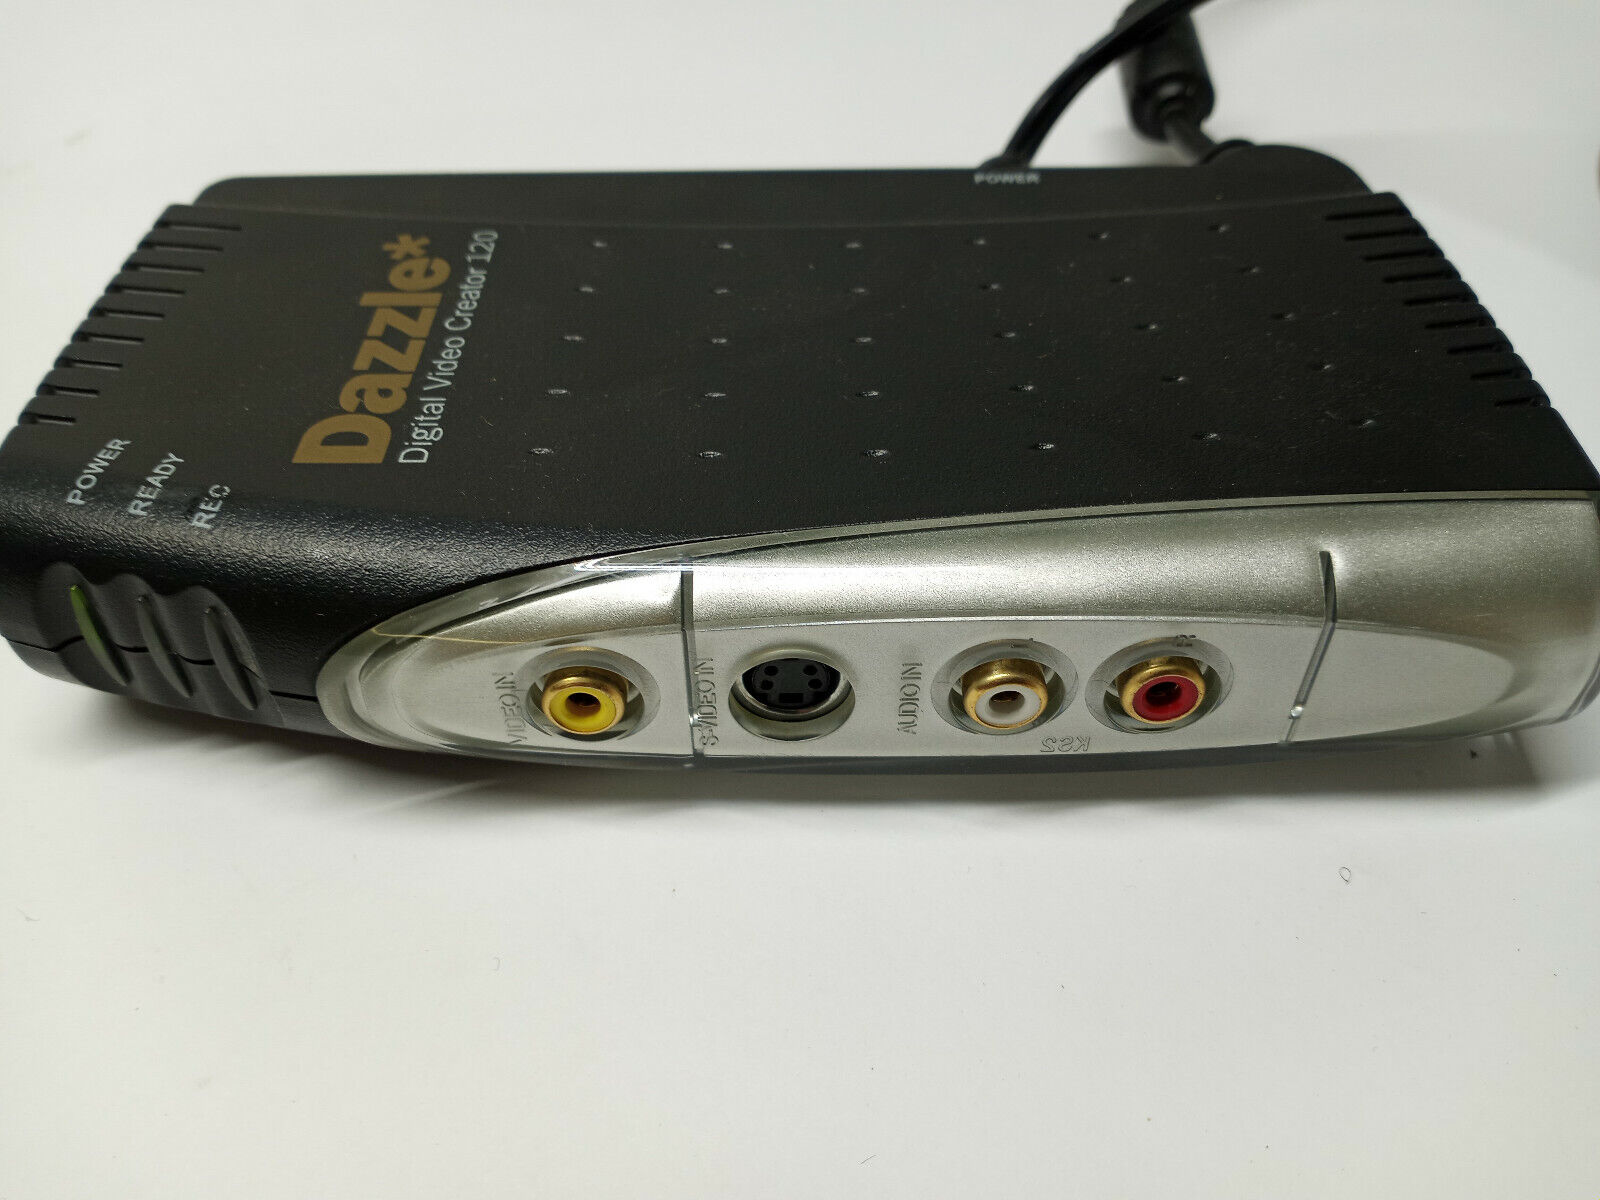 Dazzle DVC120 Digital Video Capture and Authoring Device